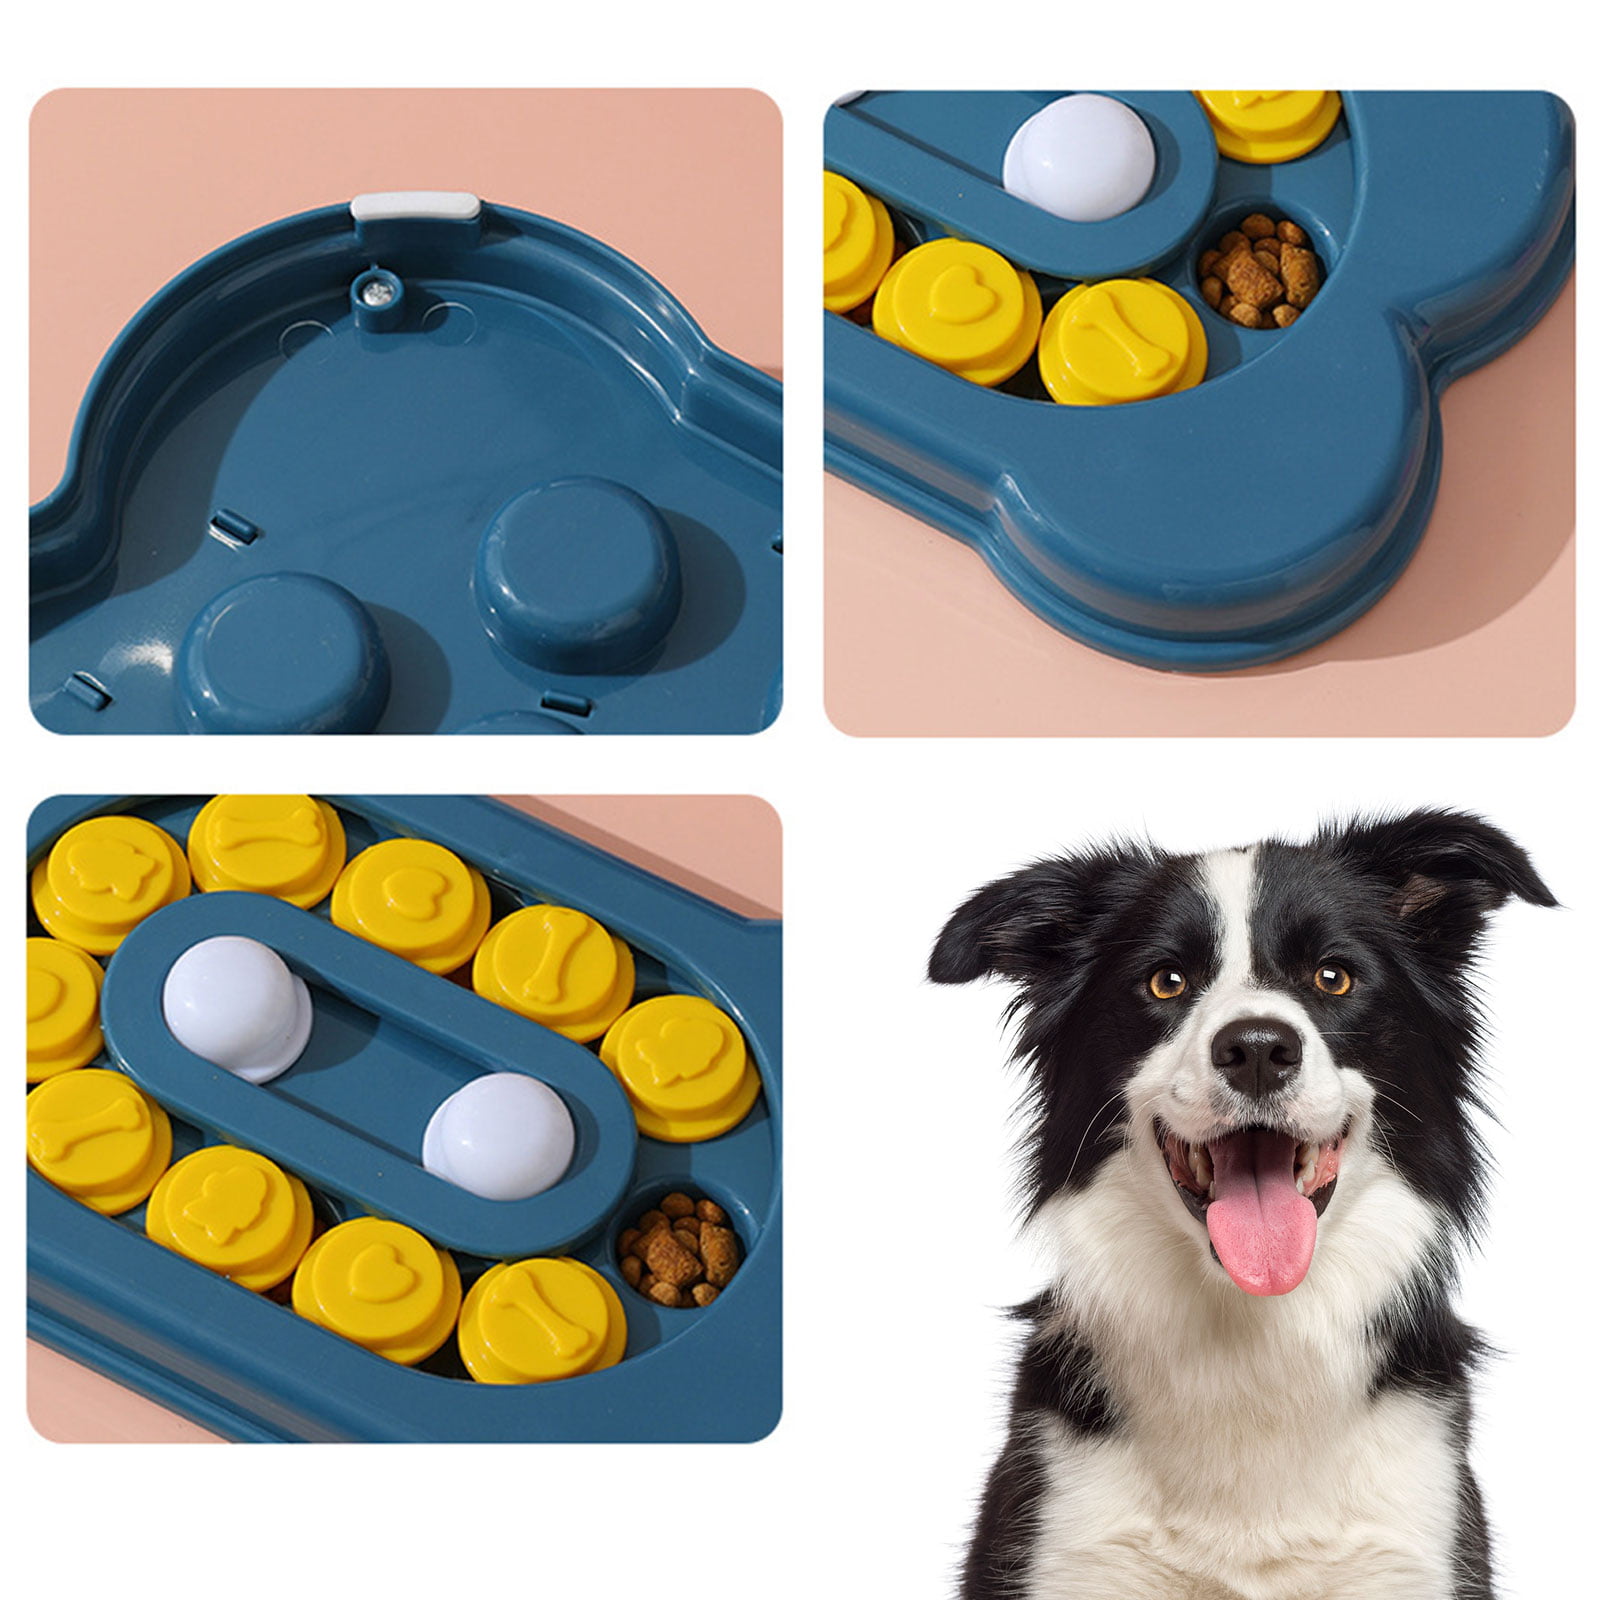 1pc ABS Blue Resin Dog Puzzle Toys, Interactive Dog Game, Dog Enrichment  Toys for Puppy Mentally Stimulating Treat Dispenser Dog Treat Puzzle Feeder  for Small,Medium and & Large Dogs Treat Training